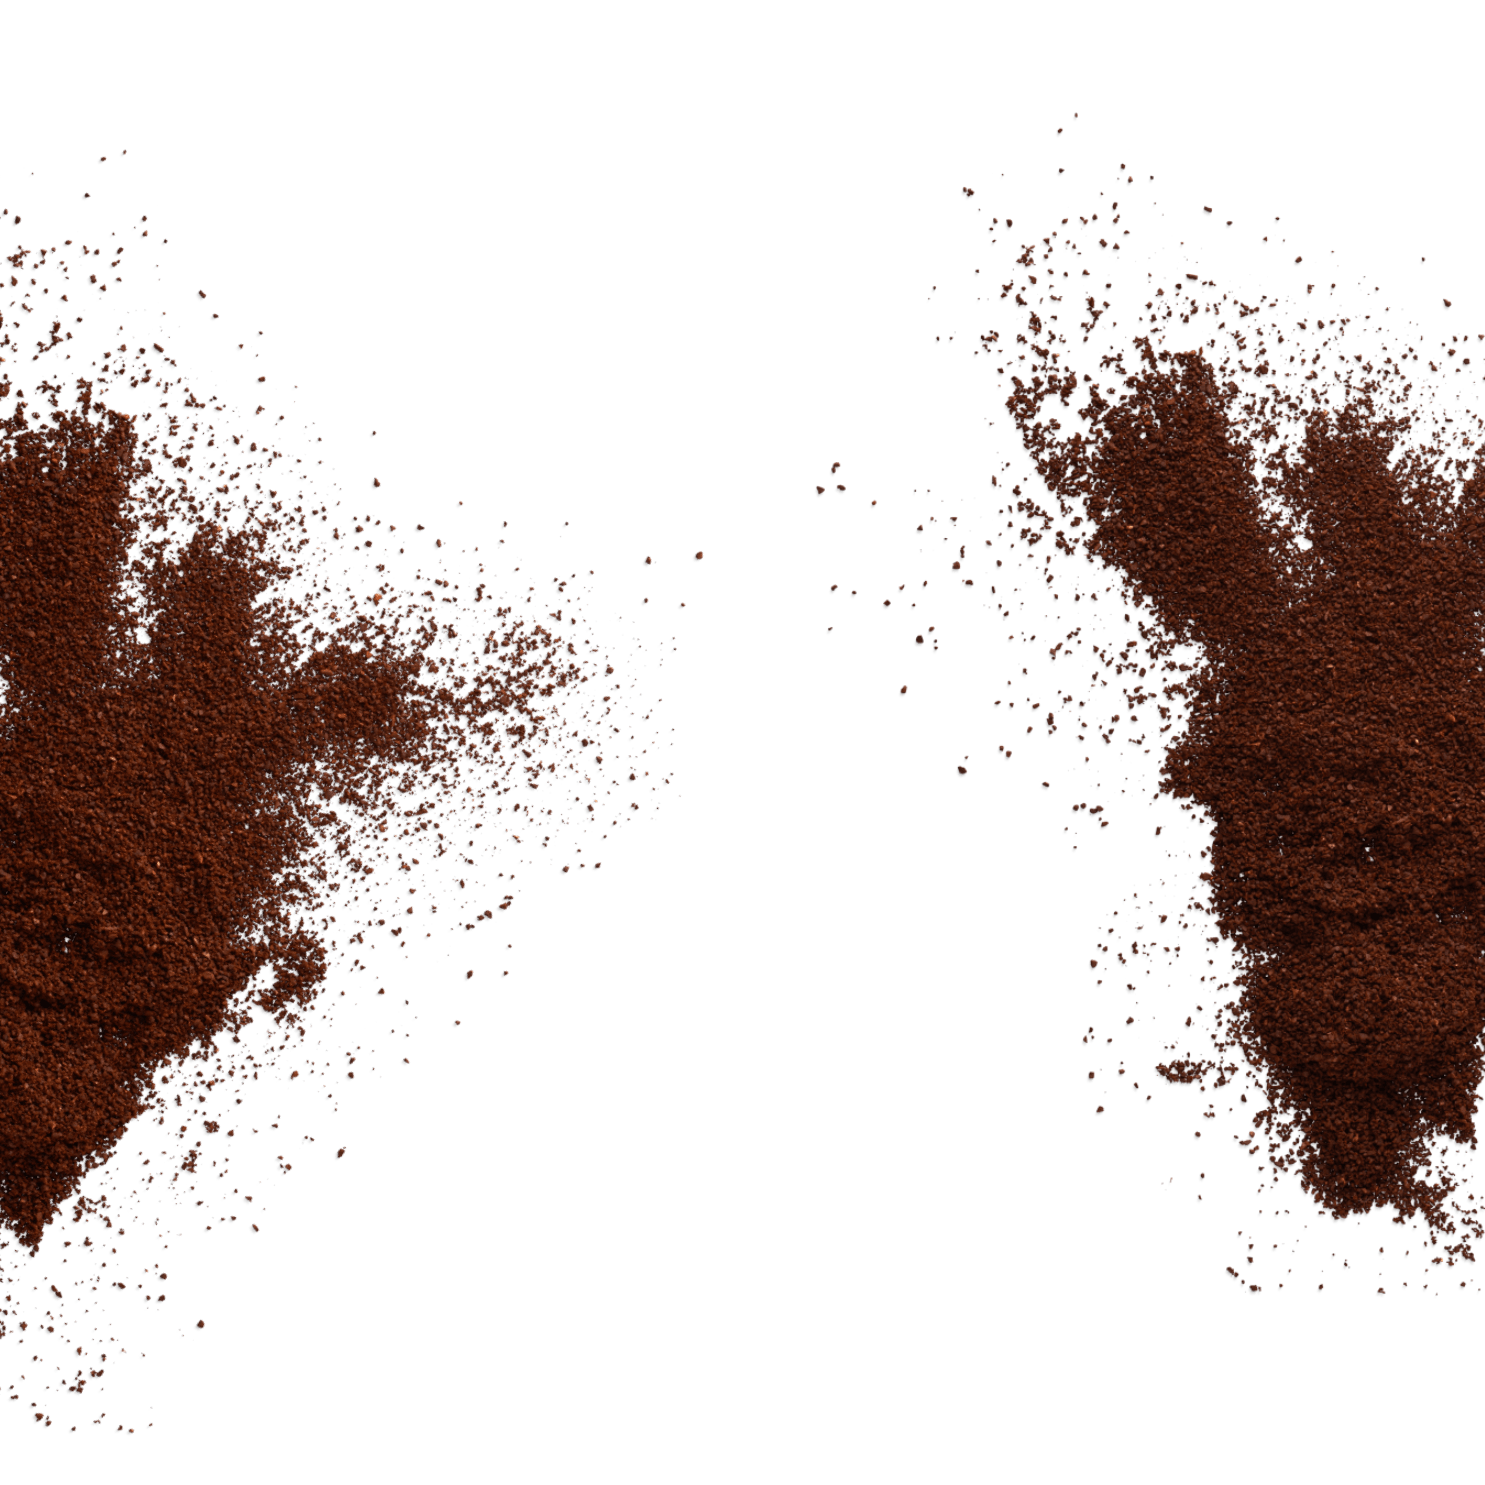 Custom coffee matches the roast and grind to fit your coffee maker